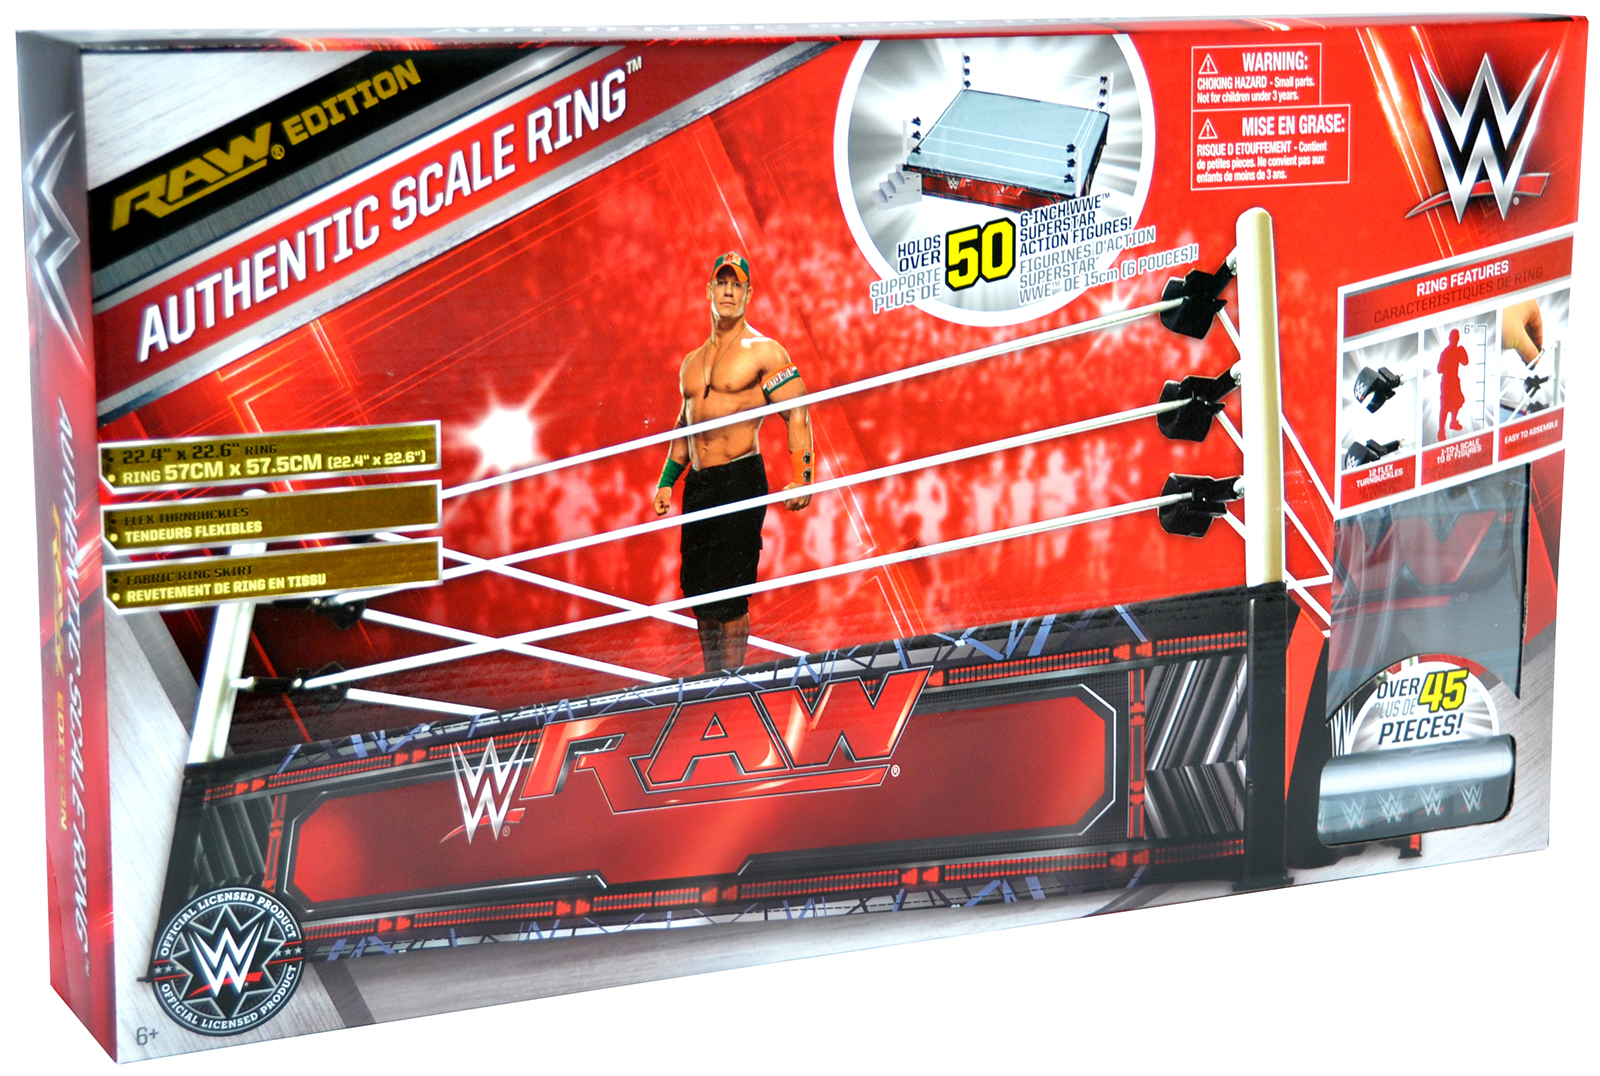 WWE "RAW Edition" Authentic Scale Ring Toy Wrestling Action Figure Ring